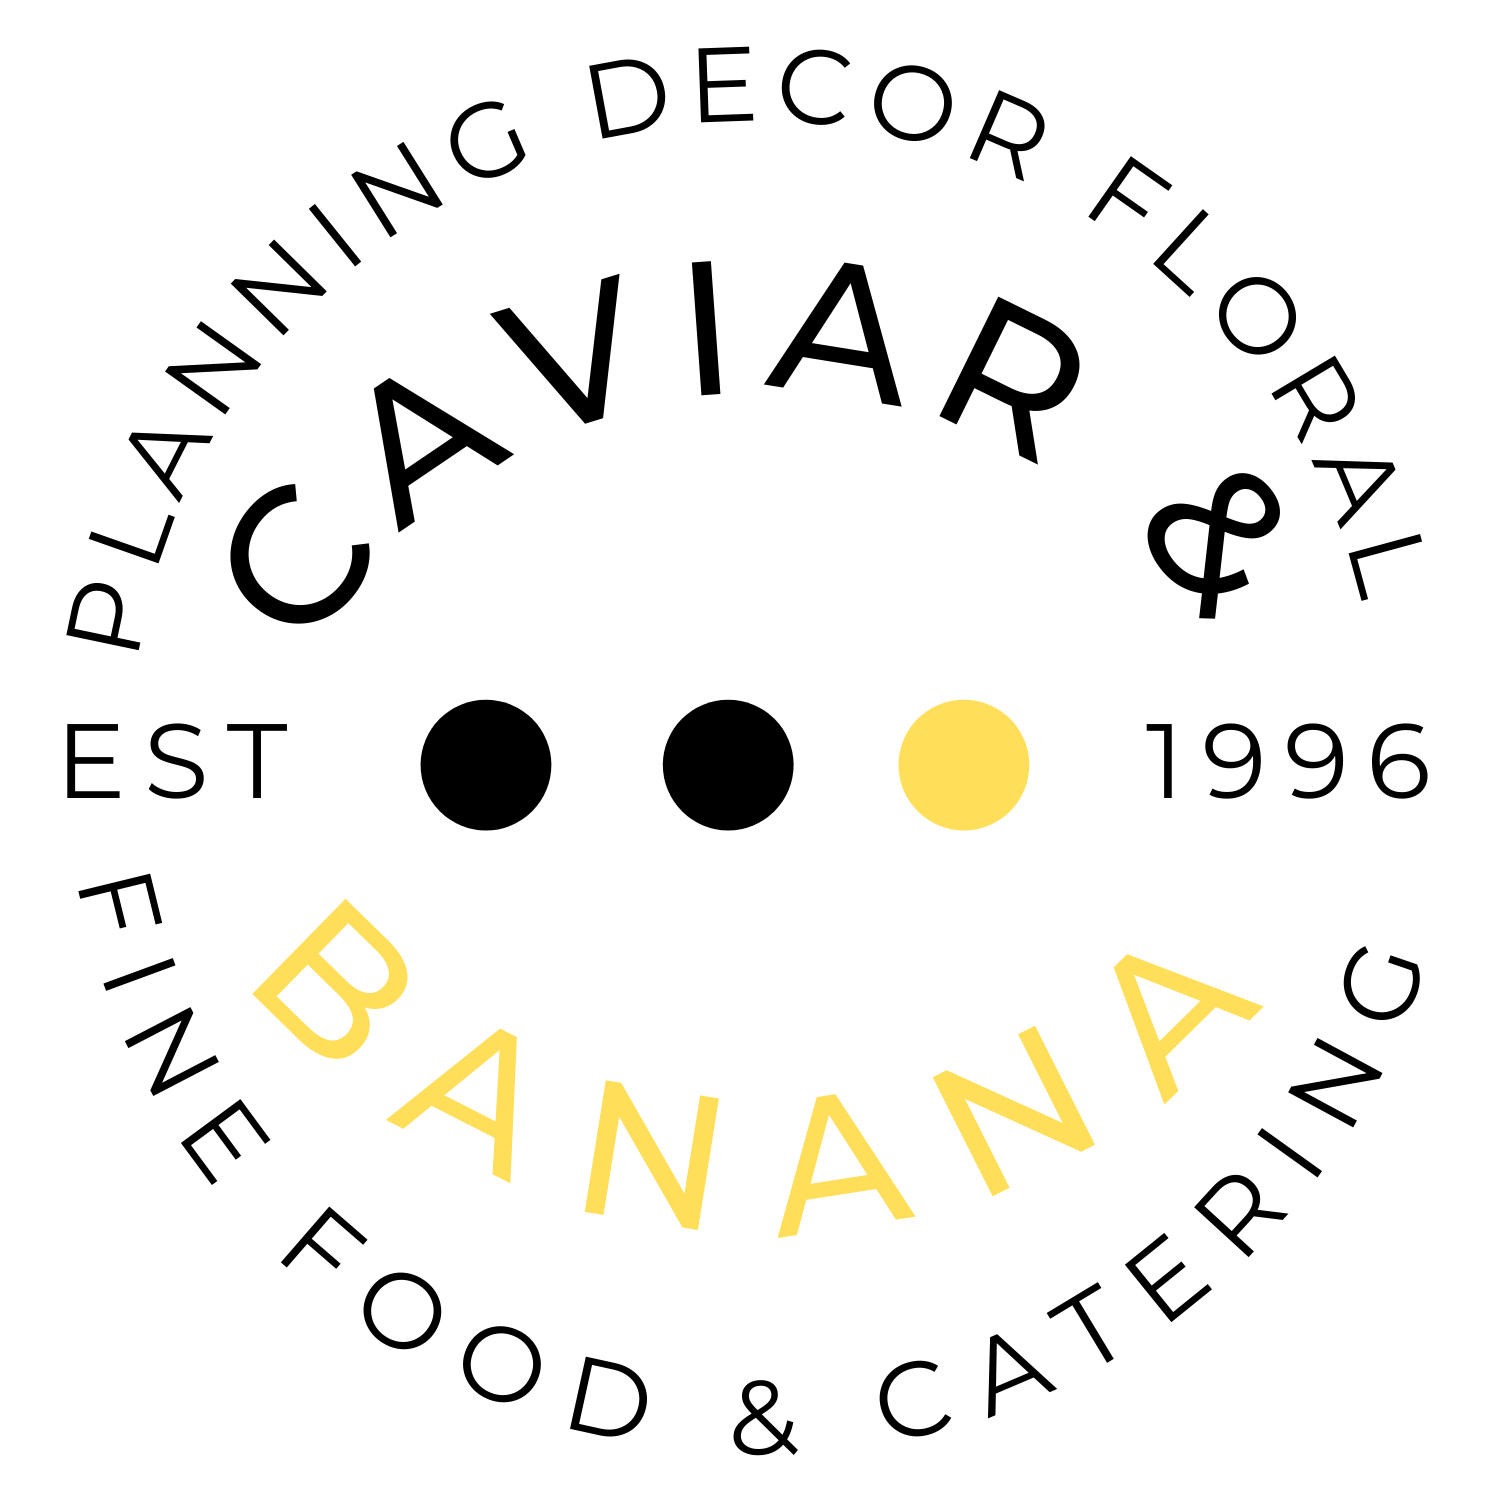 Caviar & Banana Events Caterers The Knot